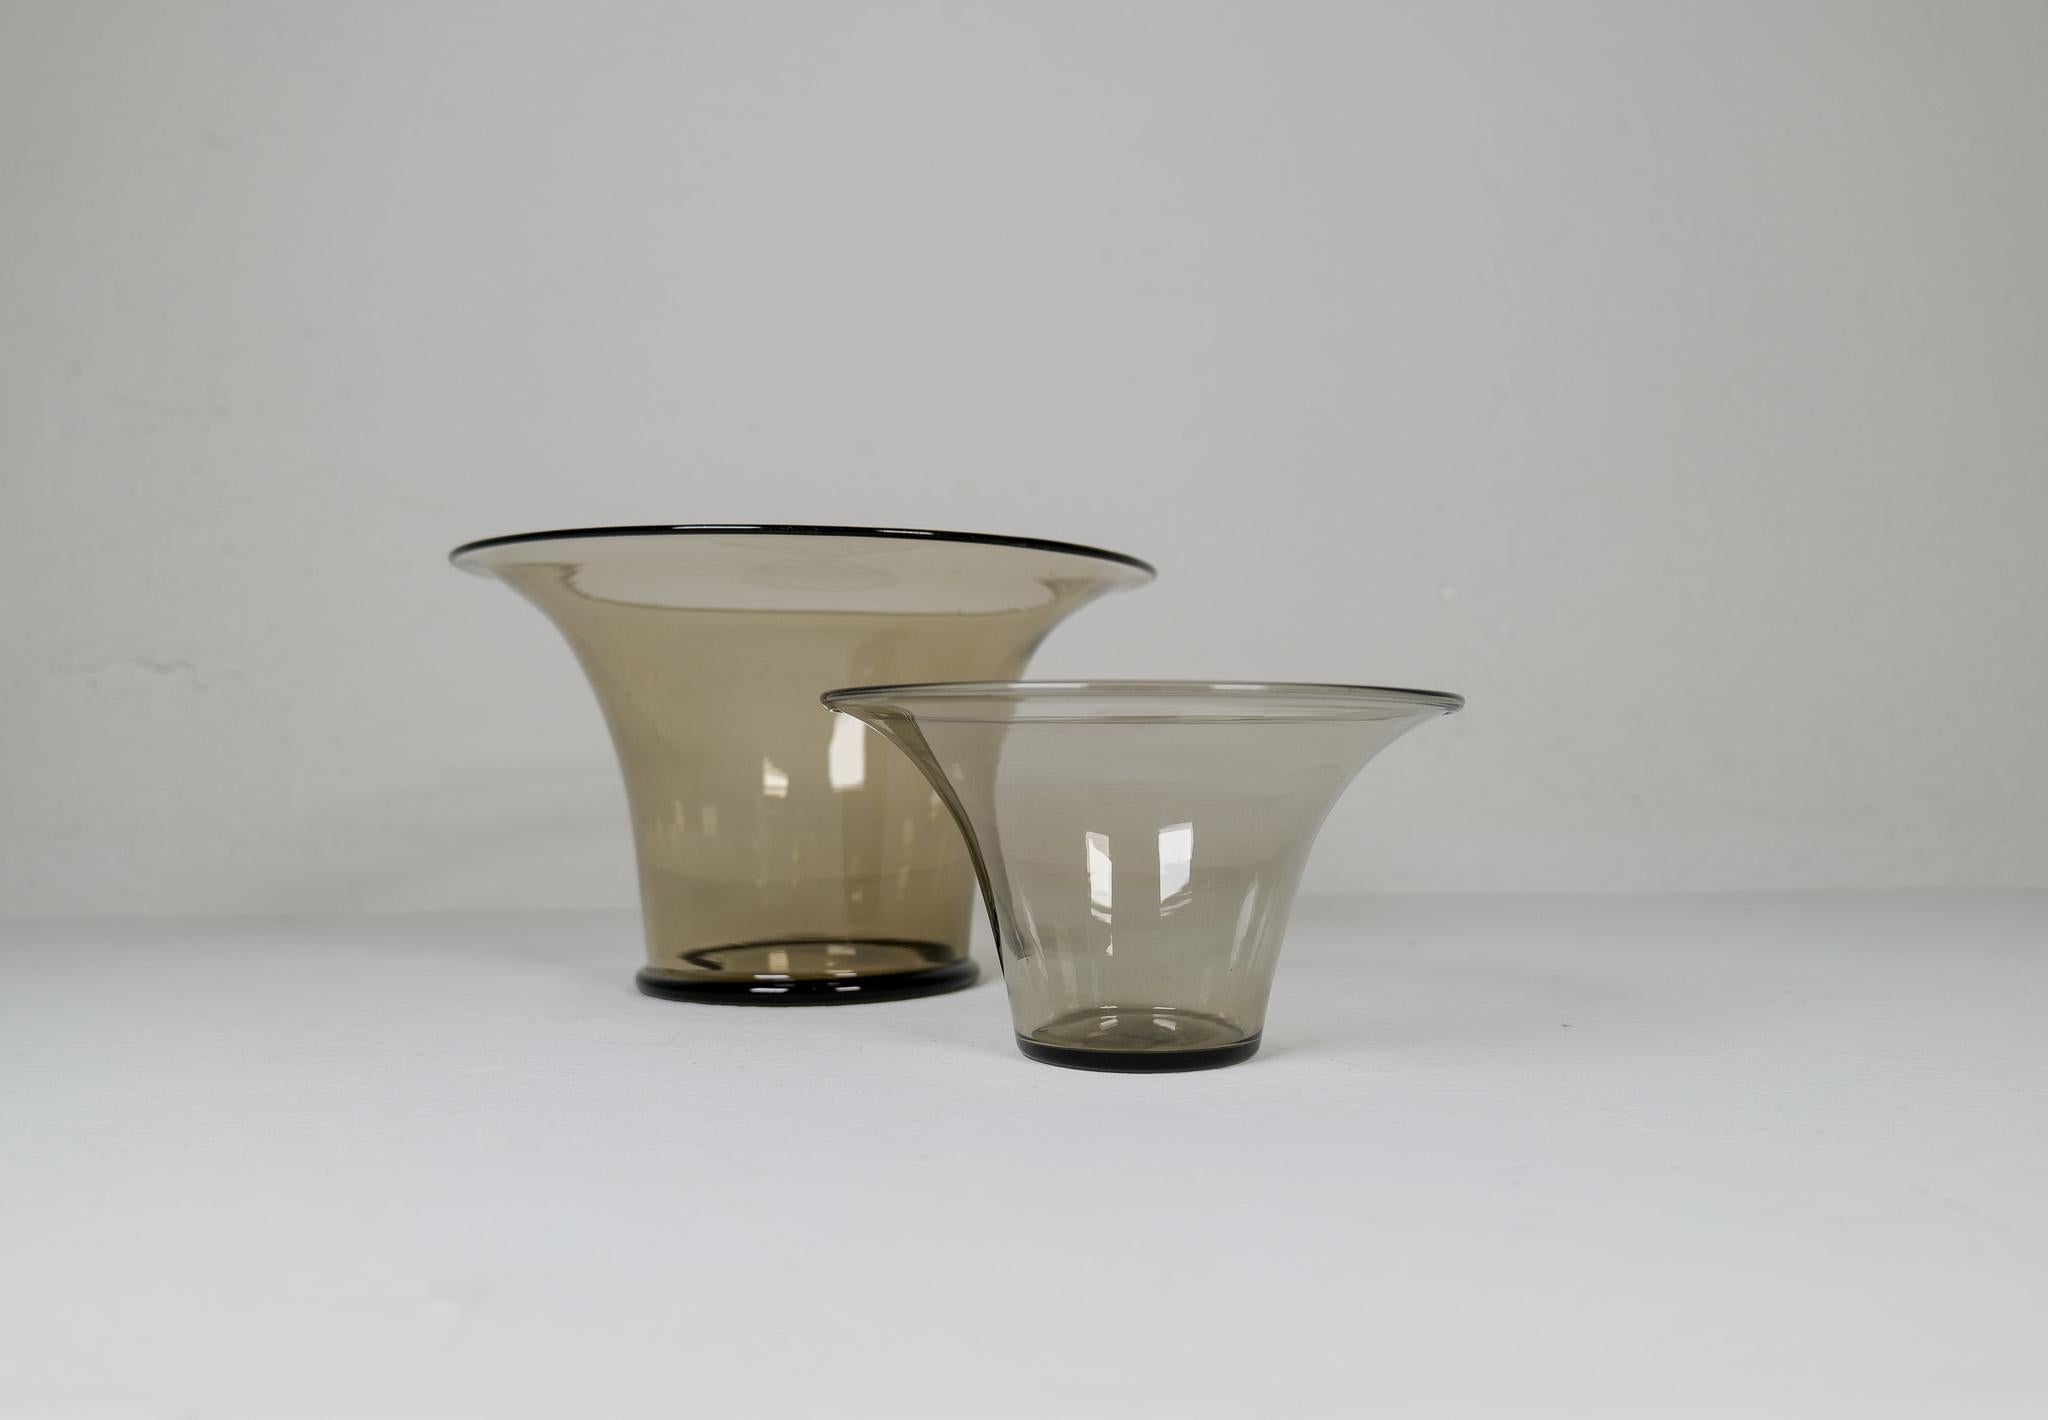 This pieces where made at Orrefors Sandvik and designed by Simon Gate in the 1920s-1930s Sweden.
The have light brown tone in the glass. Wonderful shapes and lines. 

Good vintage condition. 

Measures:  H 20 cm, D 26 cm, H 13 cm, D 18cm
 